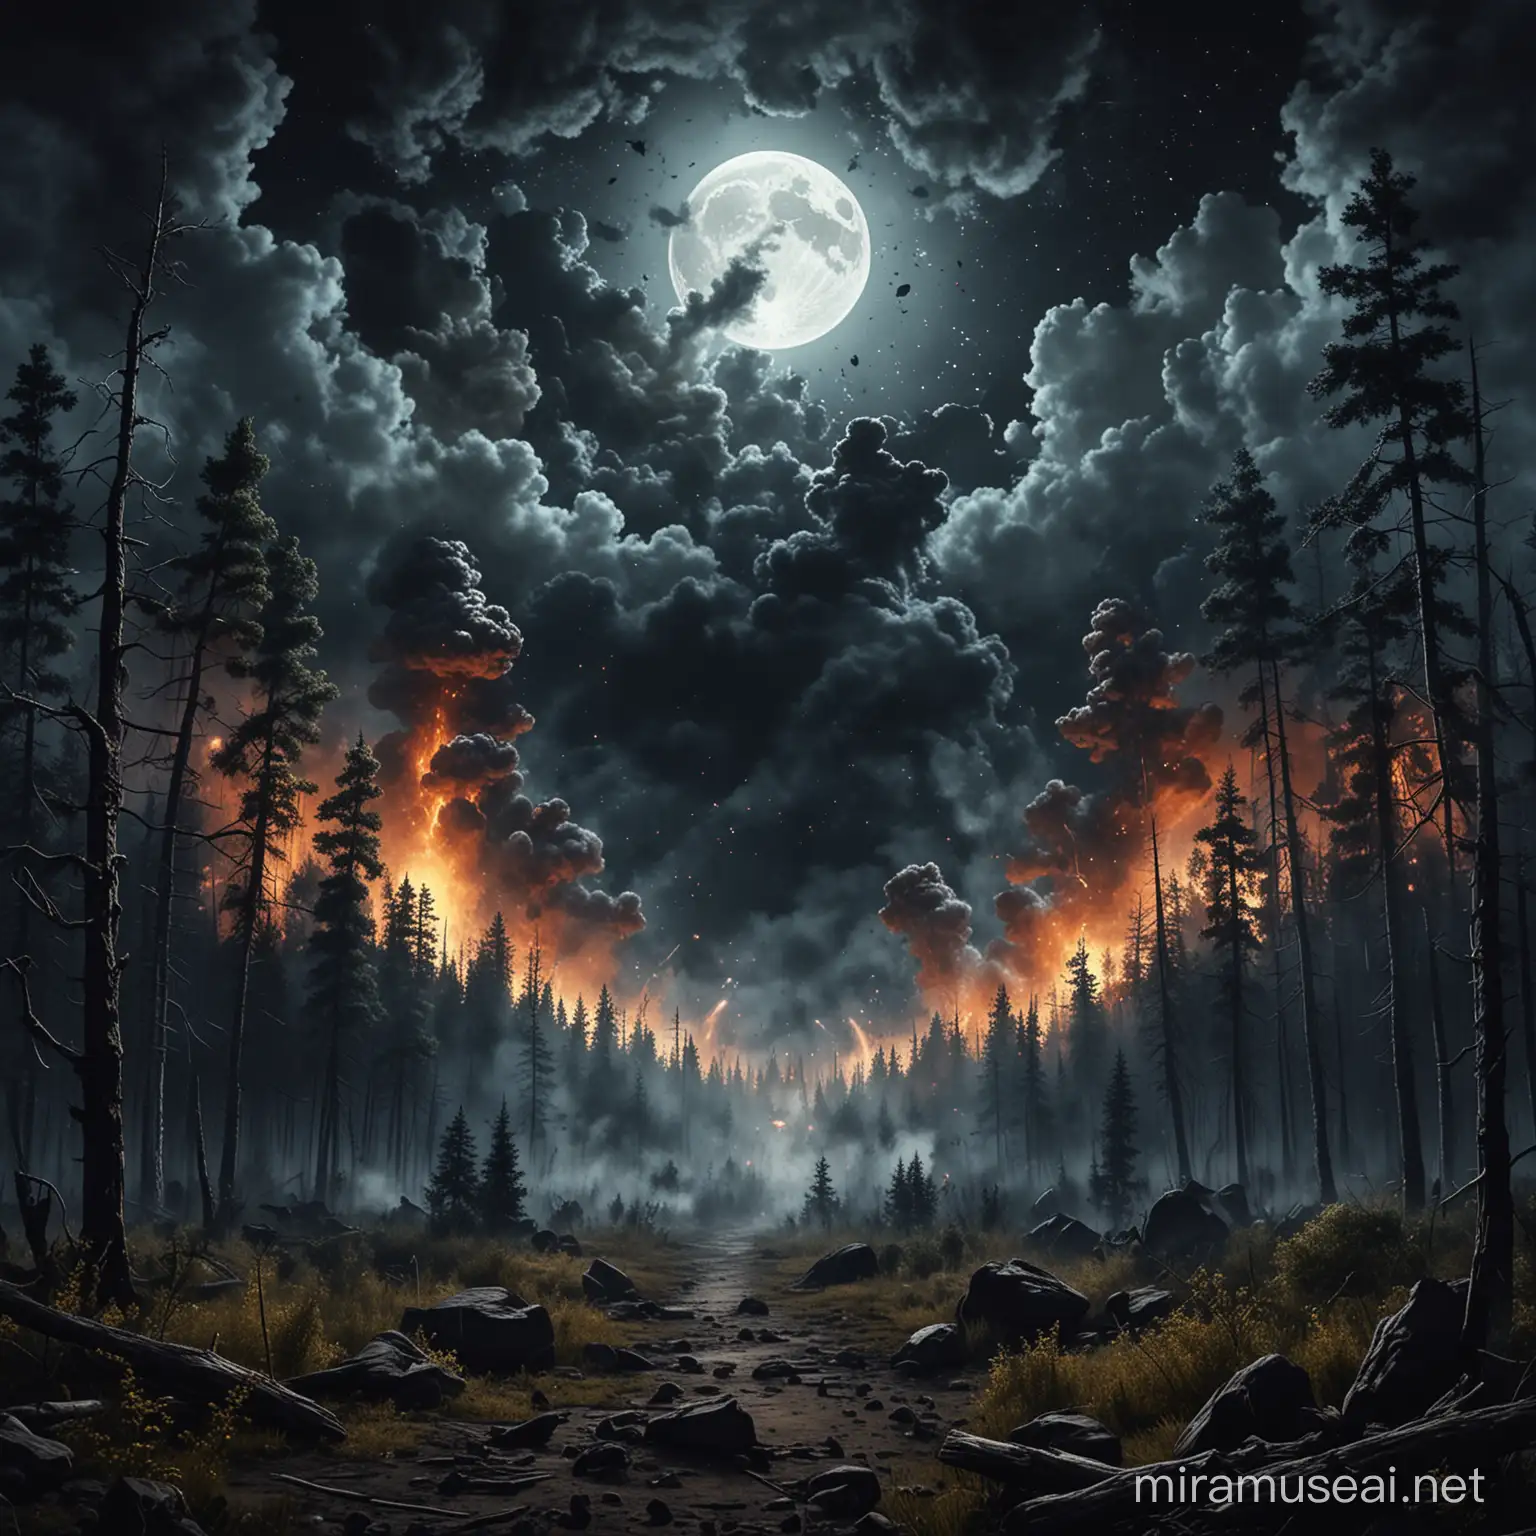 Moonlit Forest Night Eruption and Smoke